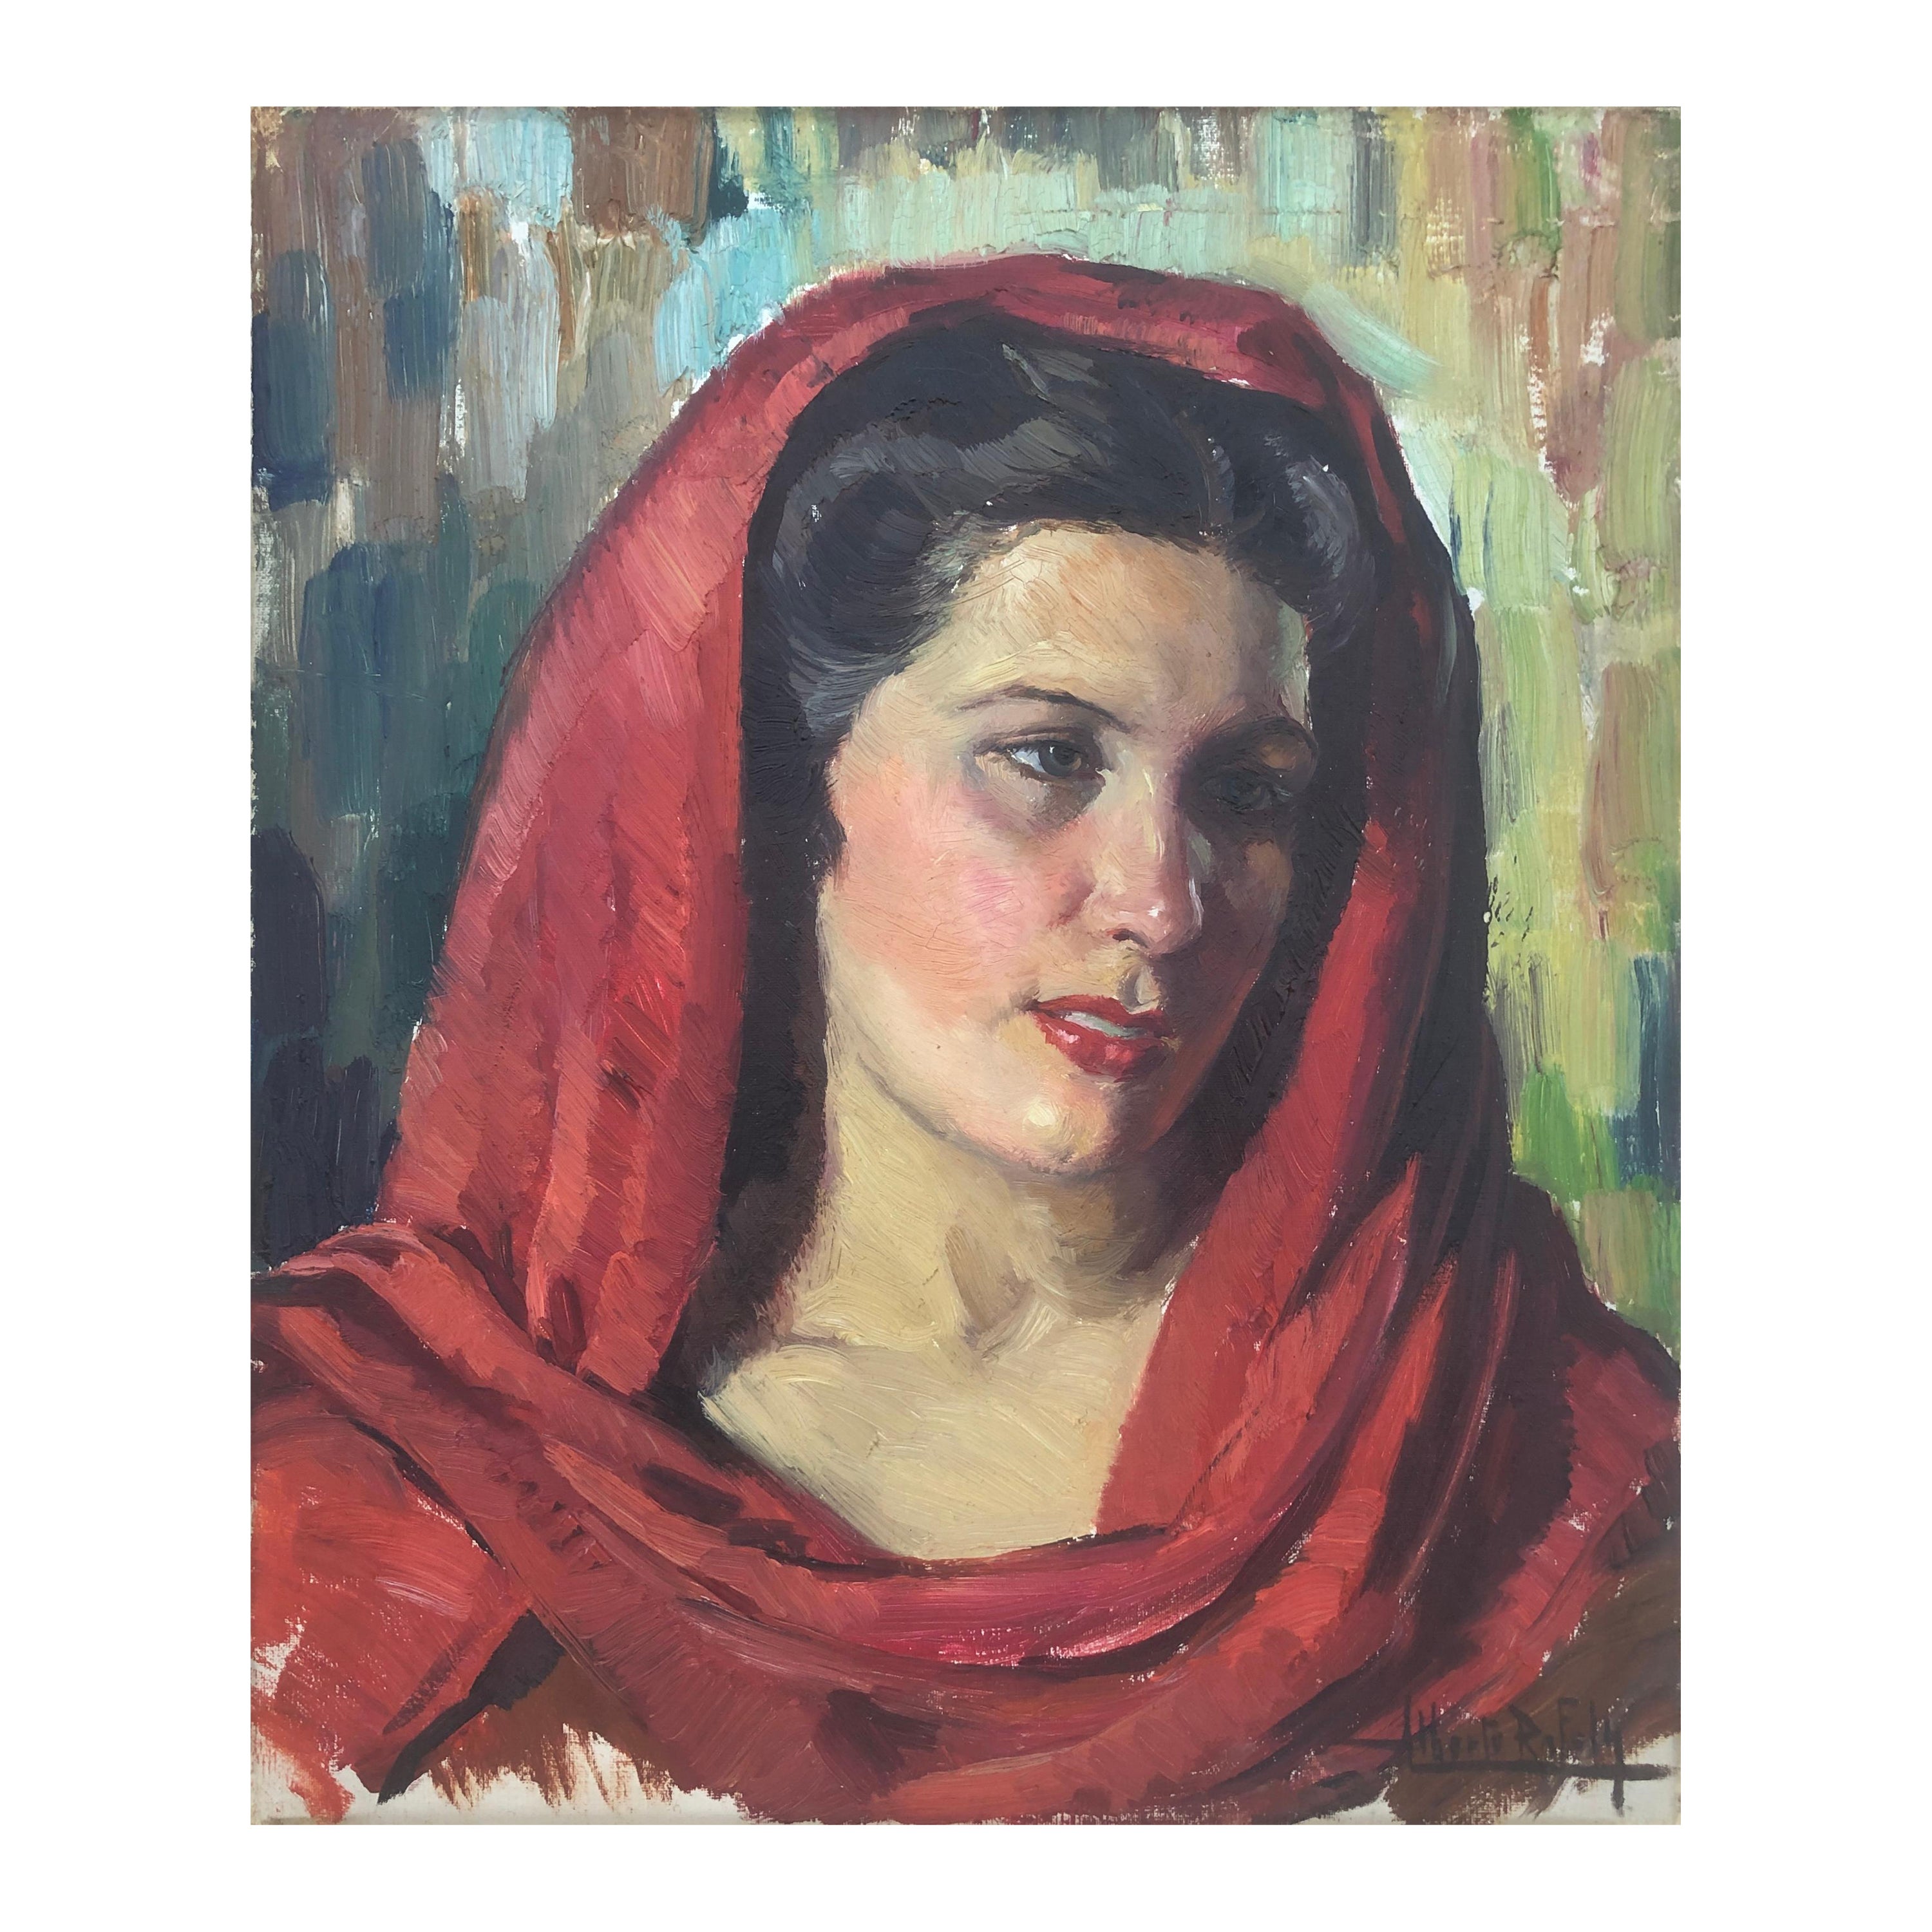 Albert Rafols Culleres Portrait Painting - Woman with headscarf original oil on canvas painting